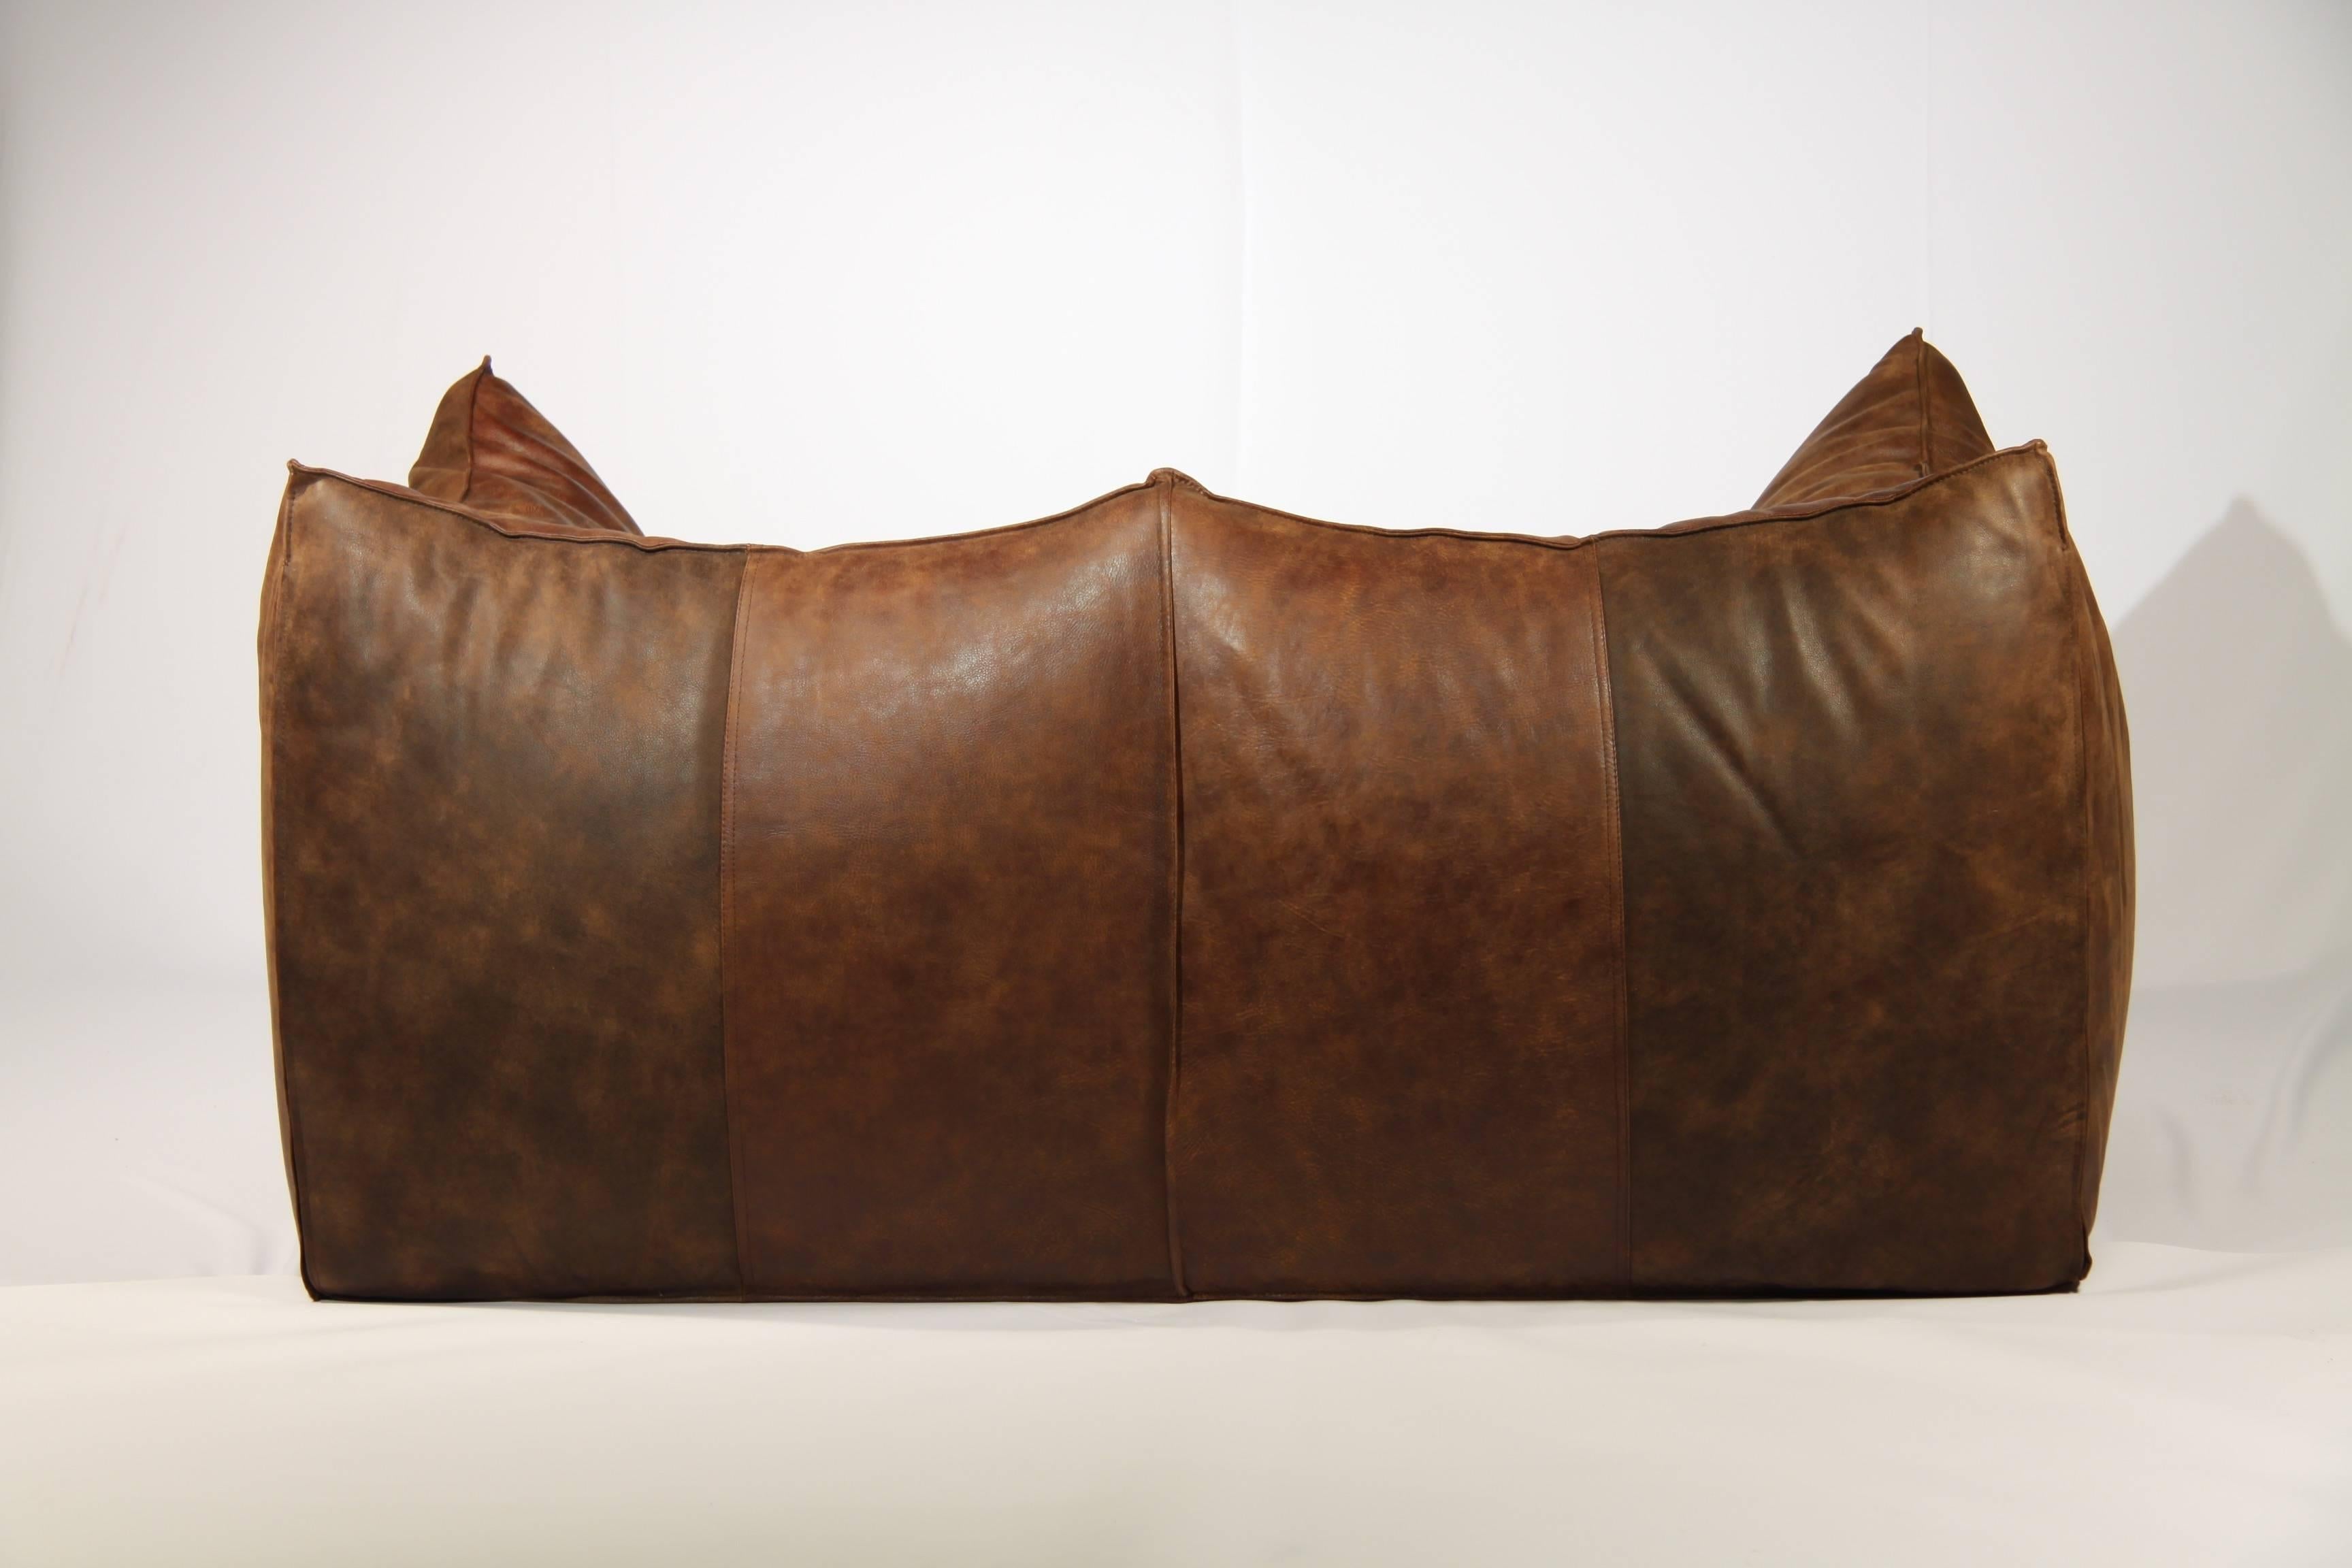 This leather sofa was designed by Mario Bellini and produced by B&B Italia during the 1950s. The icon of modern design won the “Compass D’oro International Award” in 1979. The loveseat is upholstered with thick, brown leather and the bottom base is